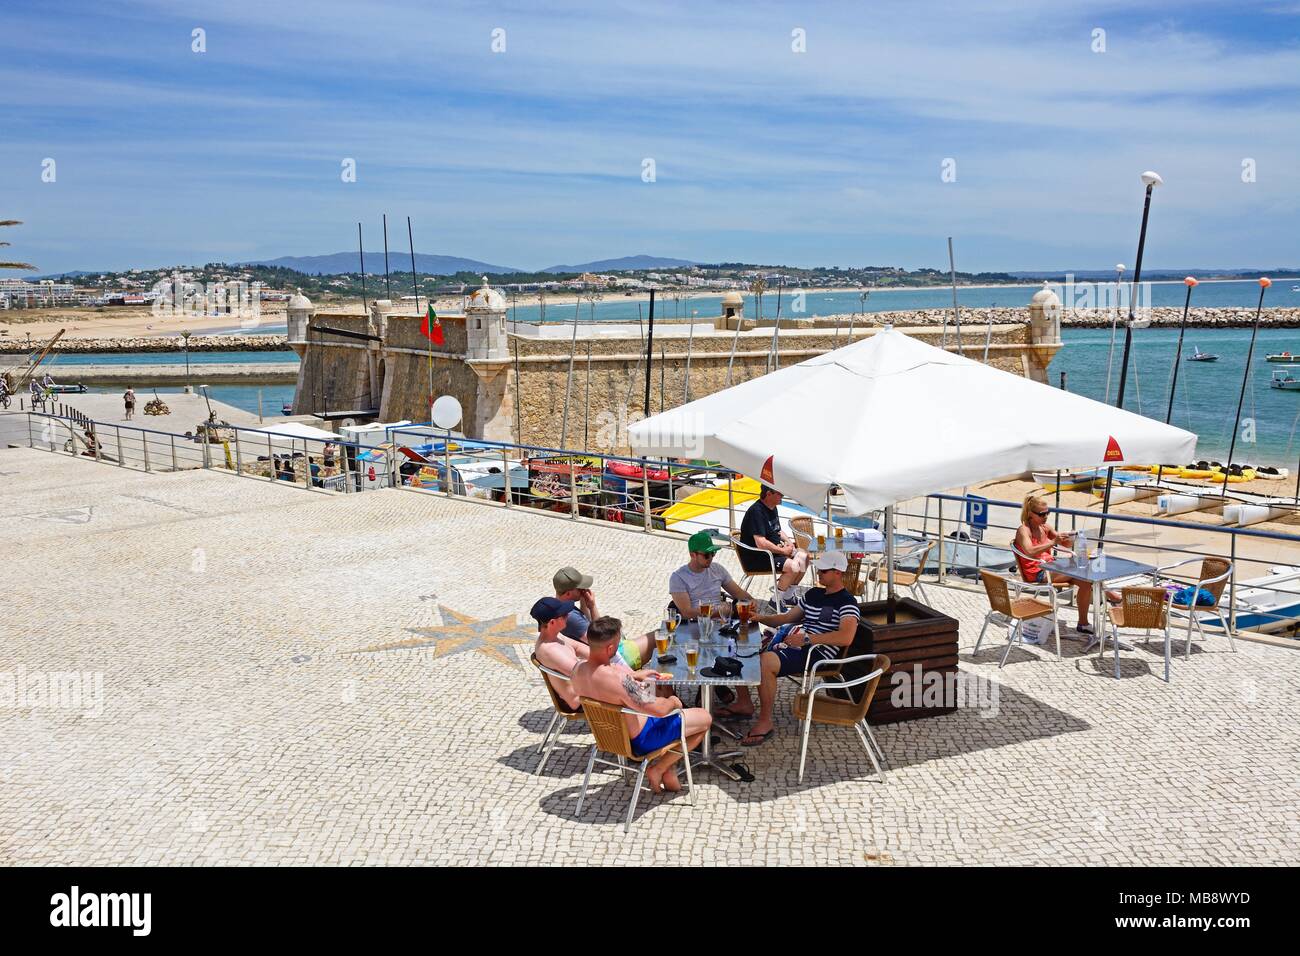 Elevated view of the Ponta da Bandeira Fort with tourists relaxing at a pavement cafe in the foreground, Lagos, Algarve, Portugal, Europe. Stock Photo